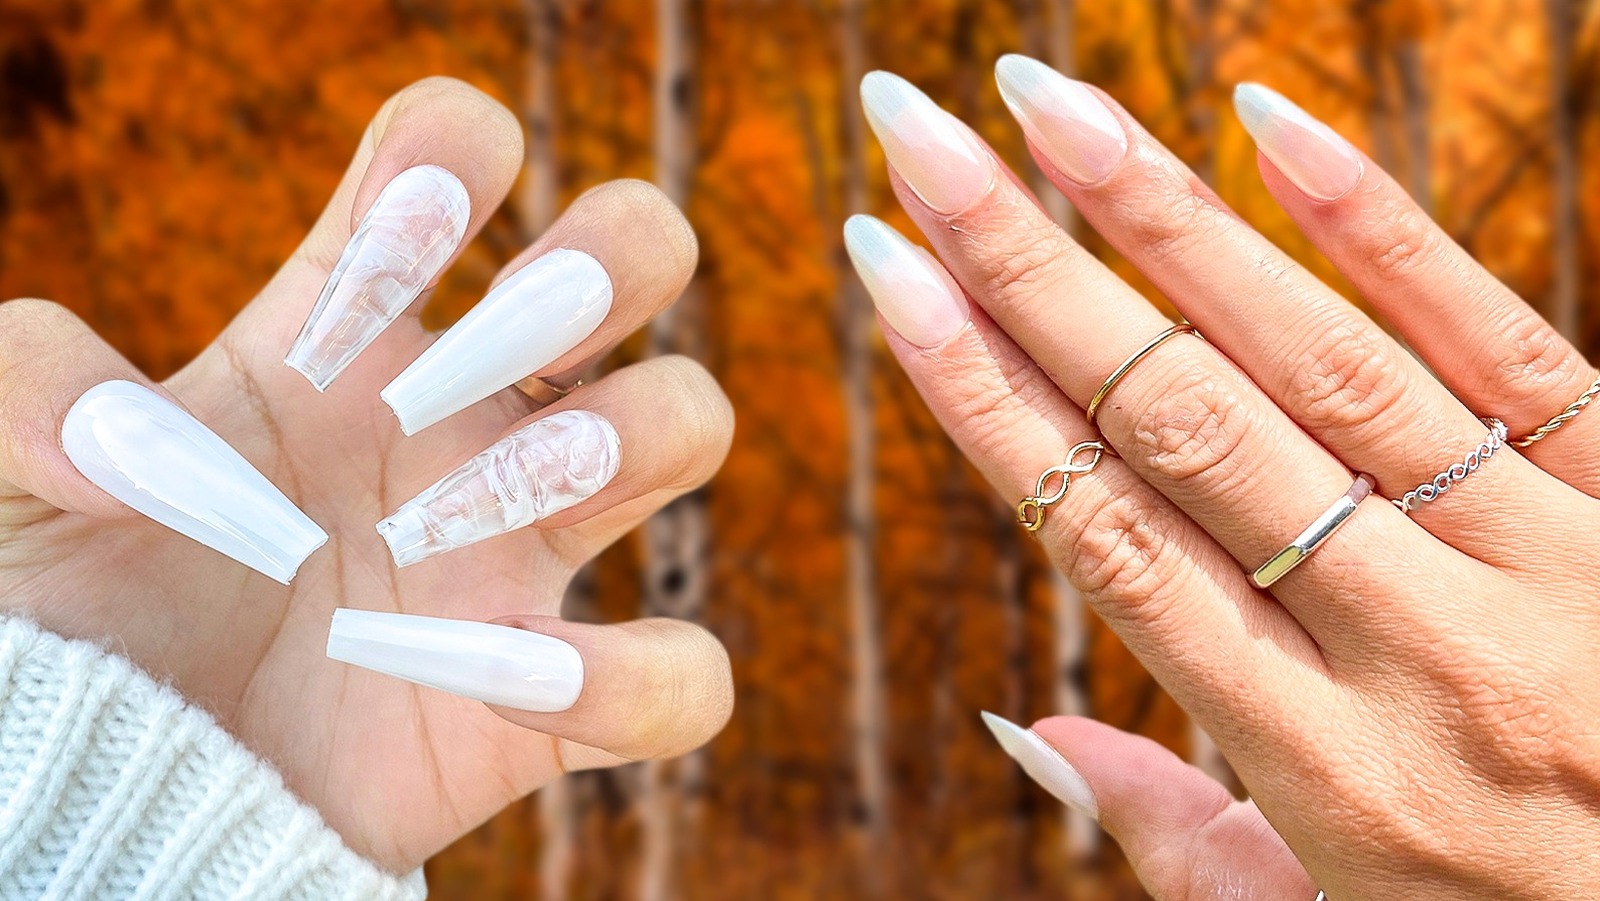 12 Simple Nail Art Designs You Can Try In 2023